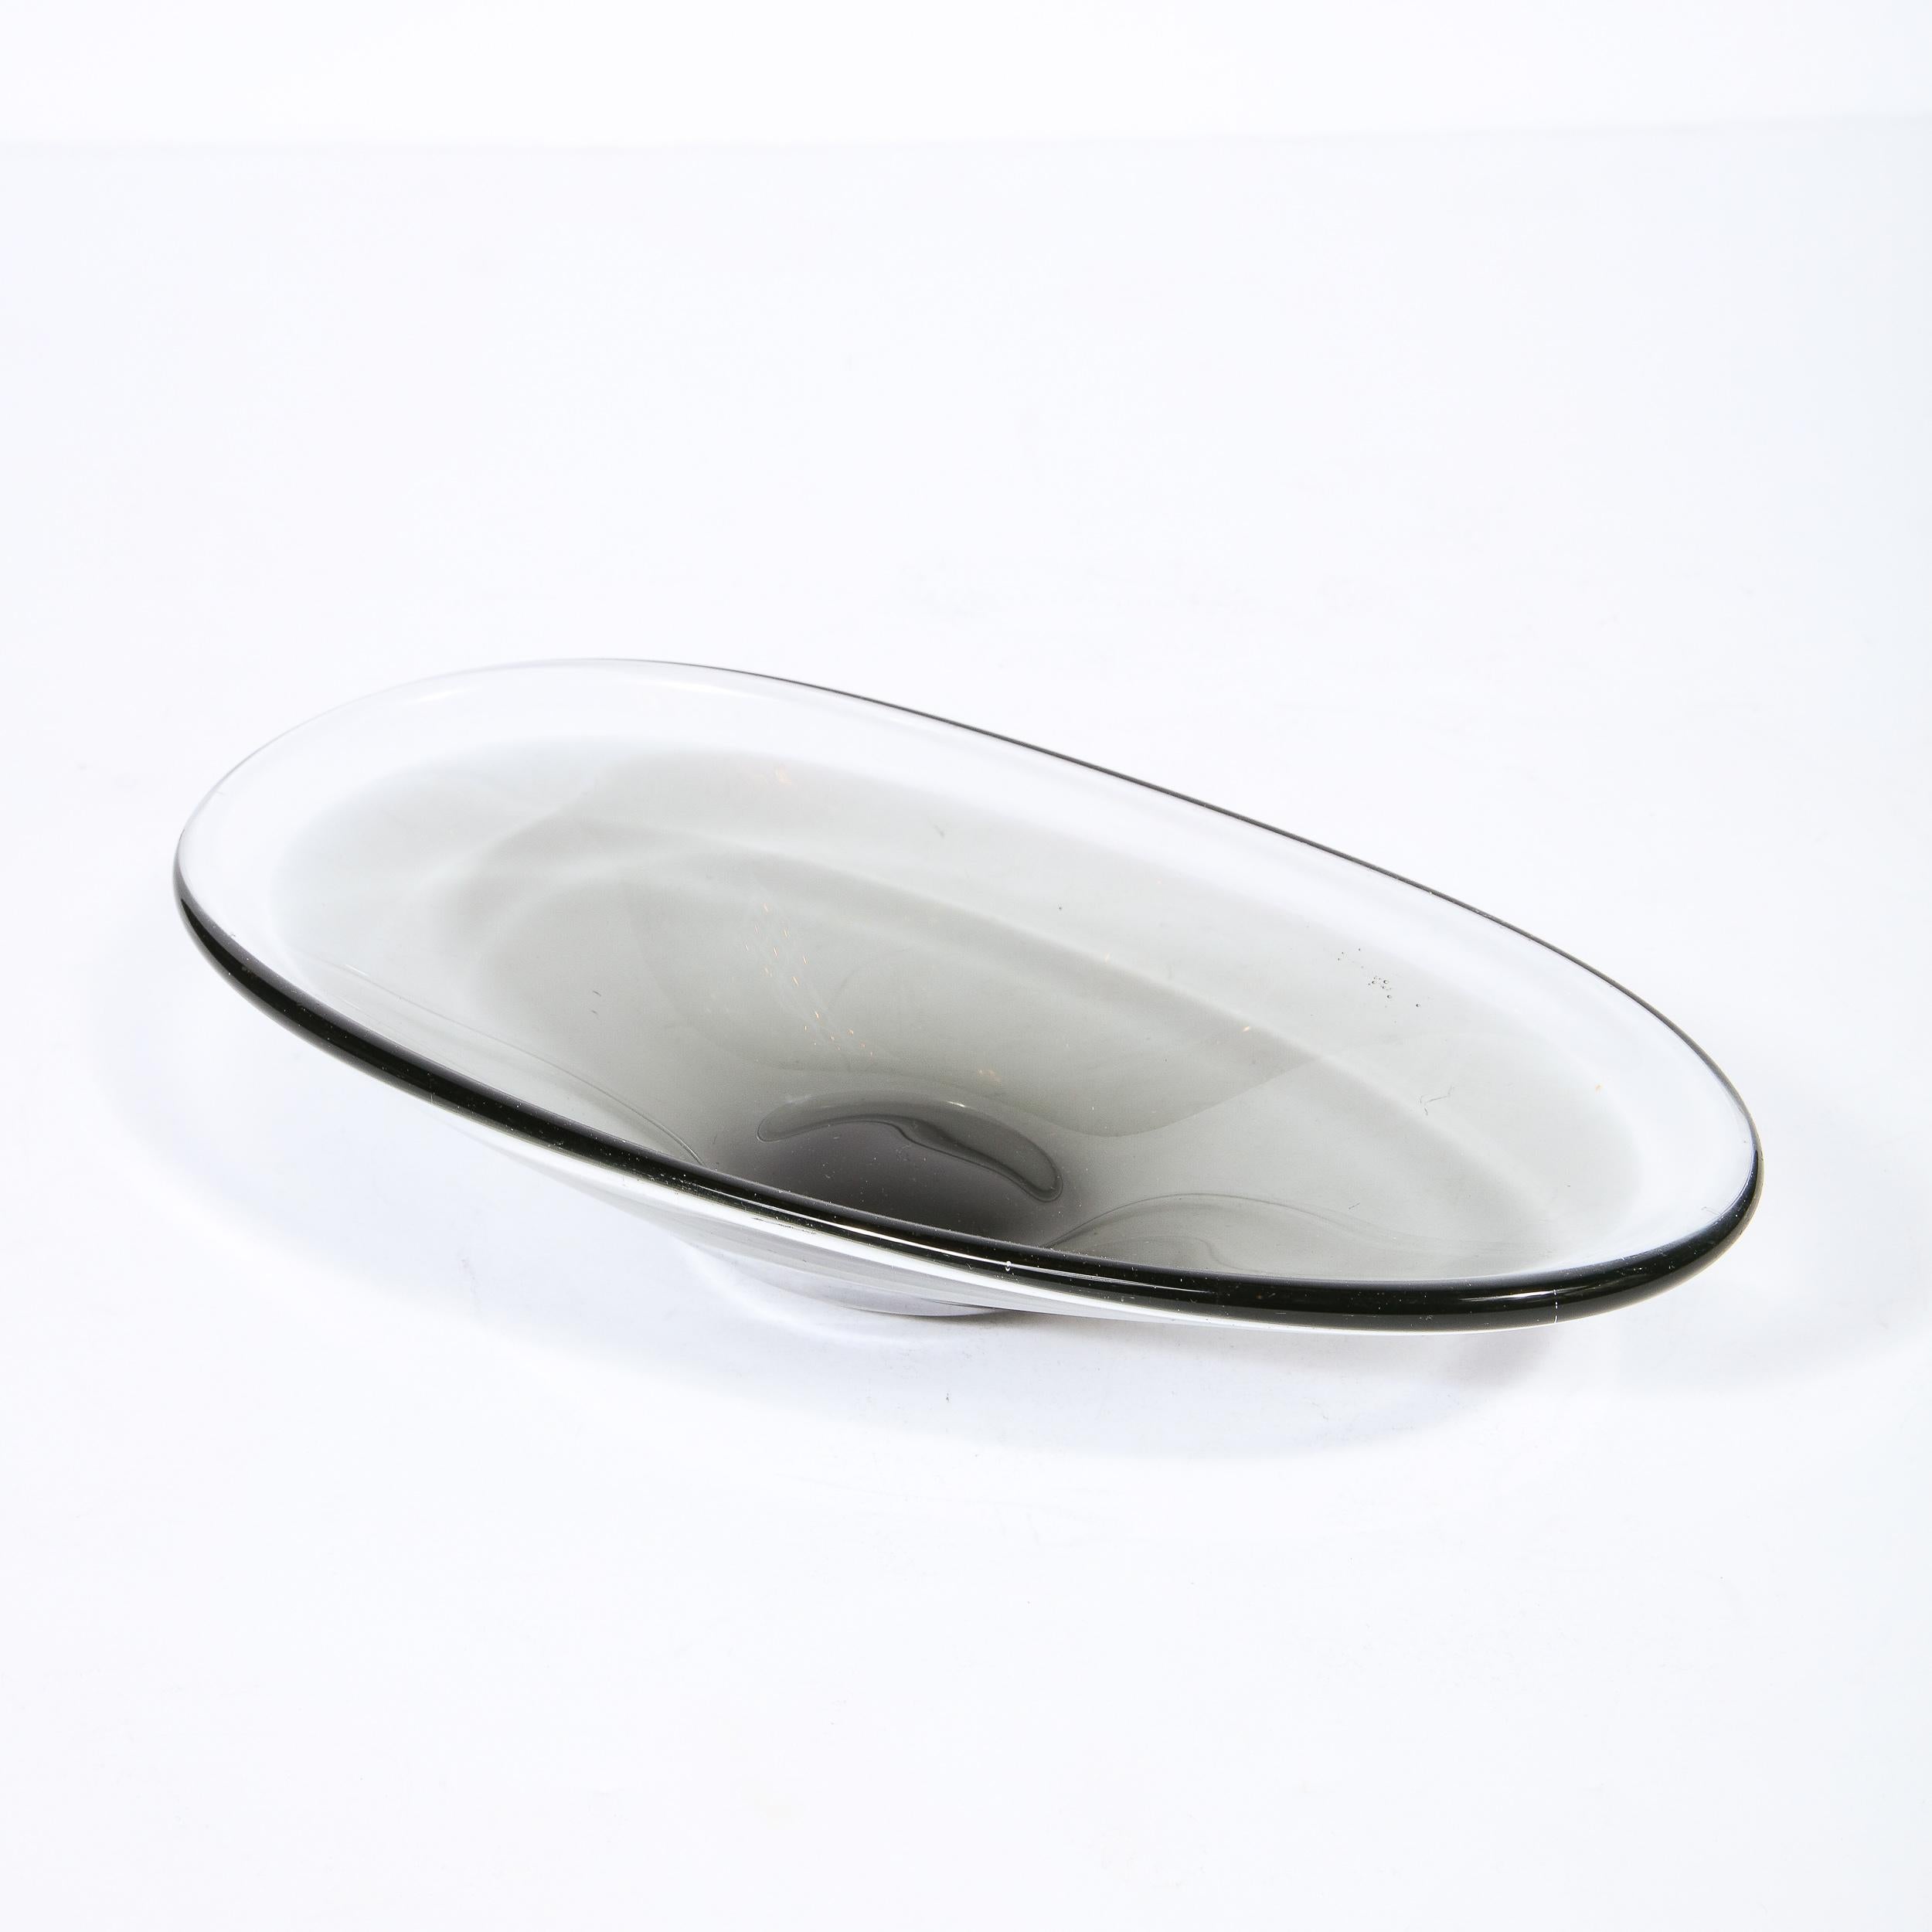 This stunning and graphic decorative bowl was handblown by the esteemed Scandinavian midcentury Studio, circa 1950. With its clean lines and amorphic form, this piece is as versatile as it is stunning blending perfectly with any style of interior